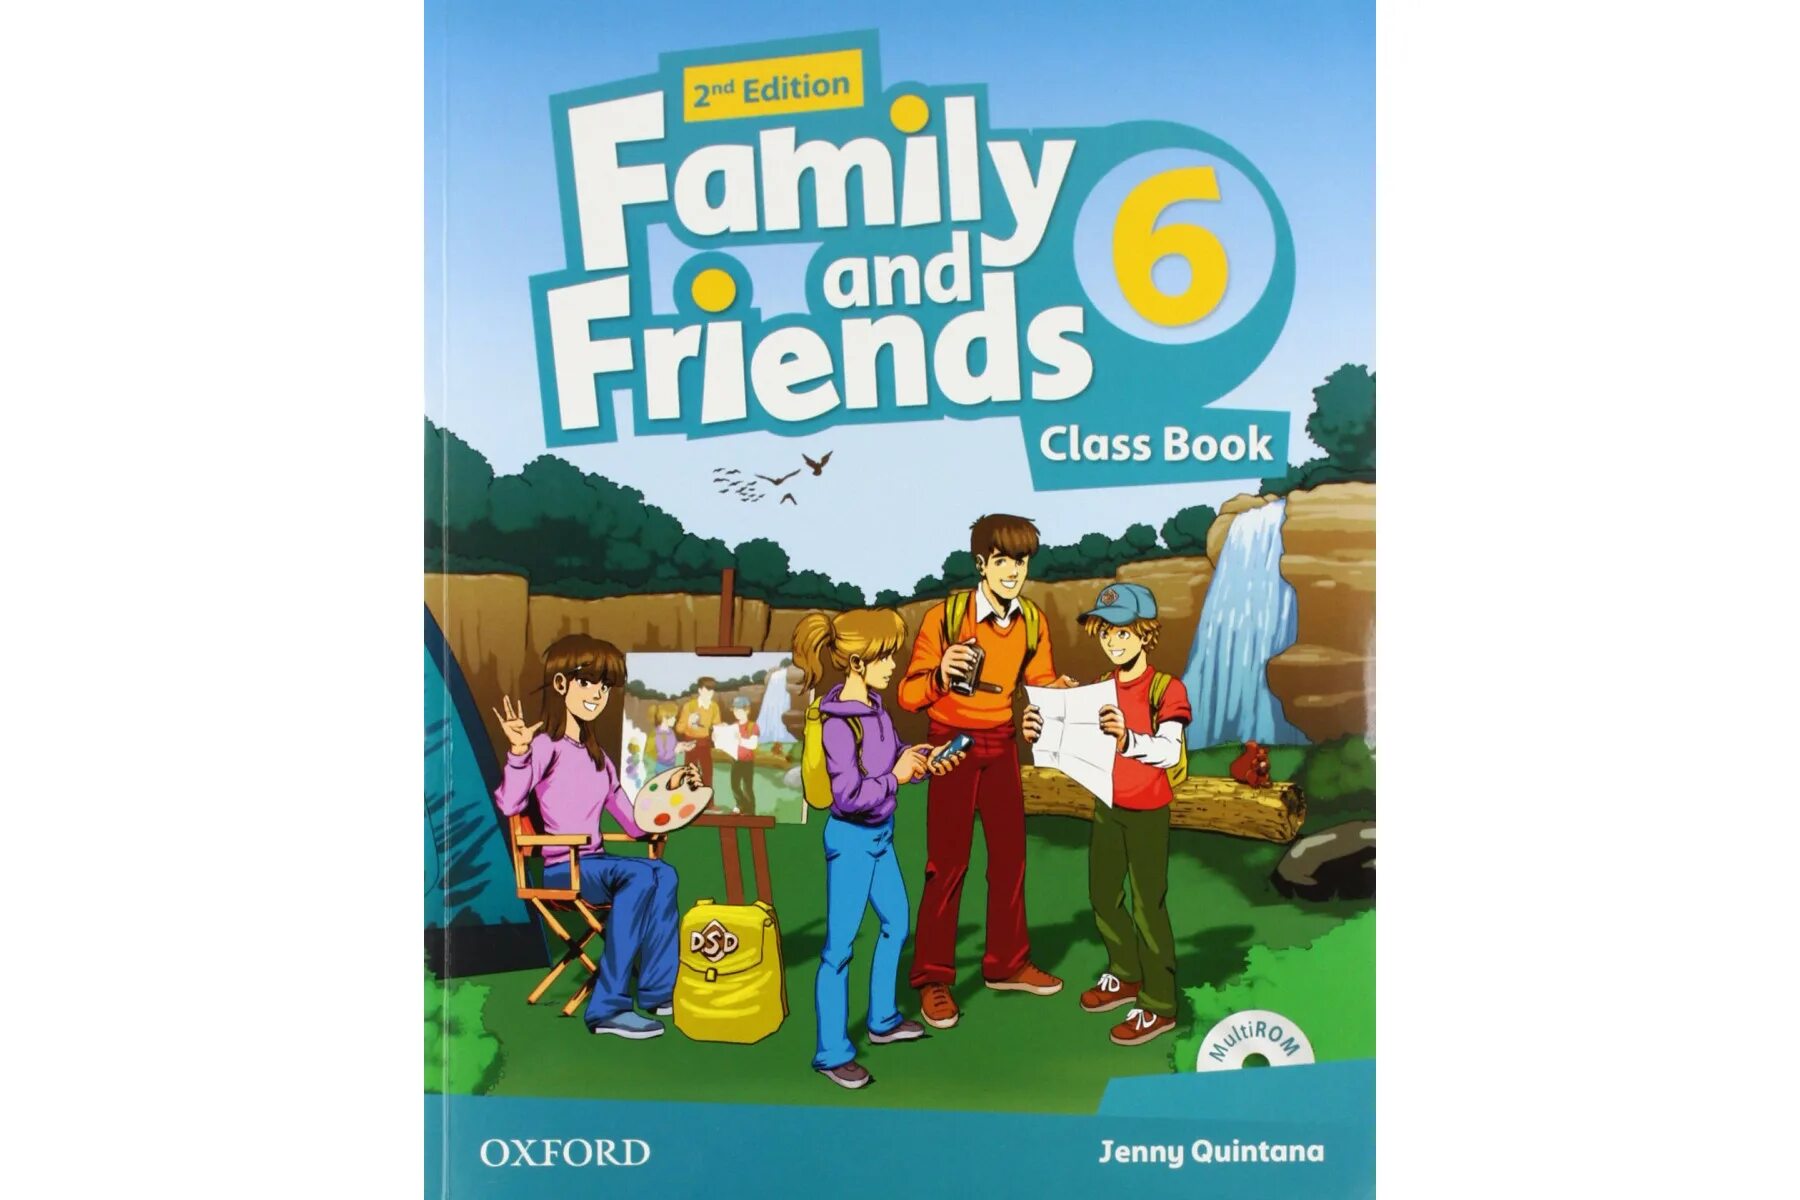 Family and friends students. Фэмили френдс 2. Family and friends 5 класс. Family and friends 6 класс. Family and friends 5 class book.